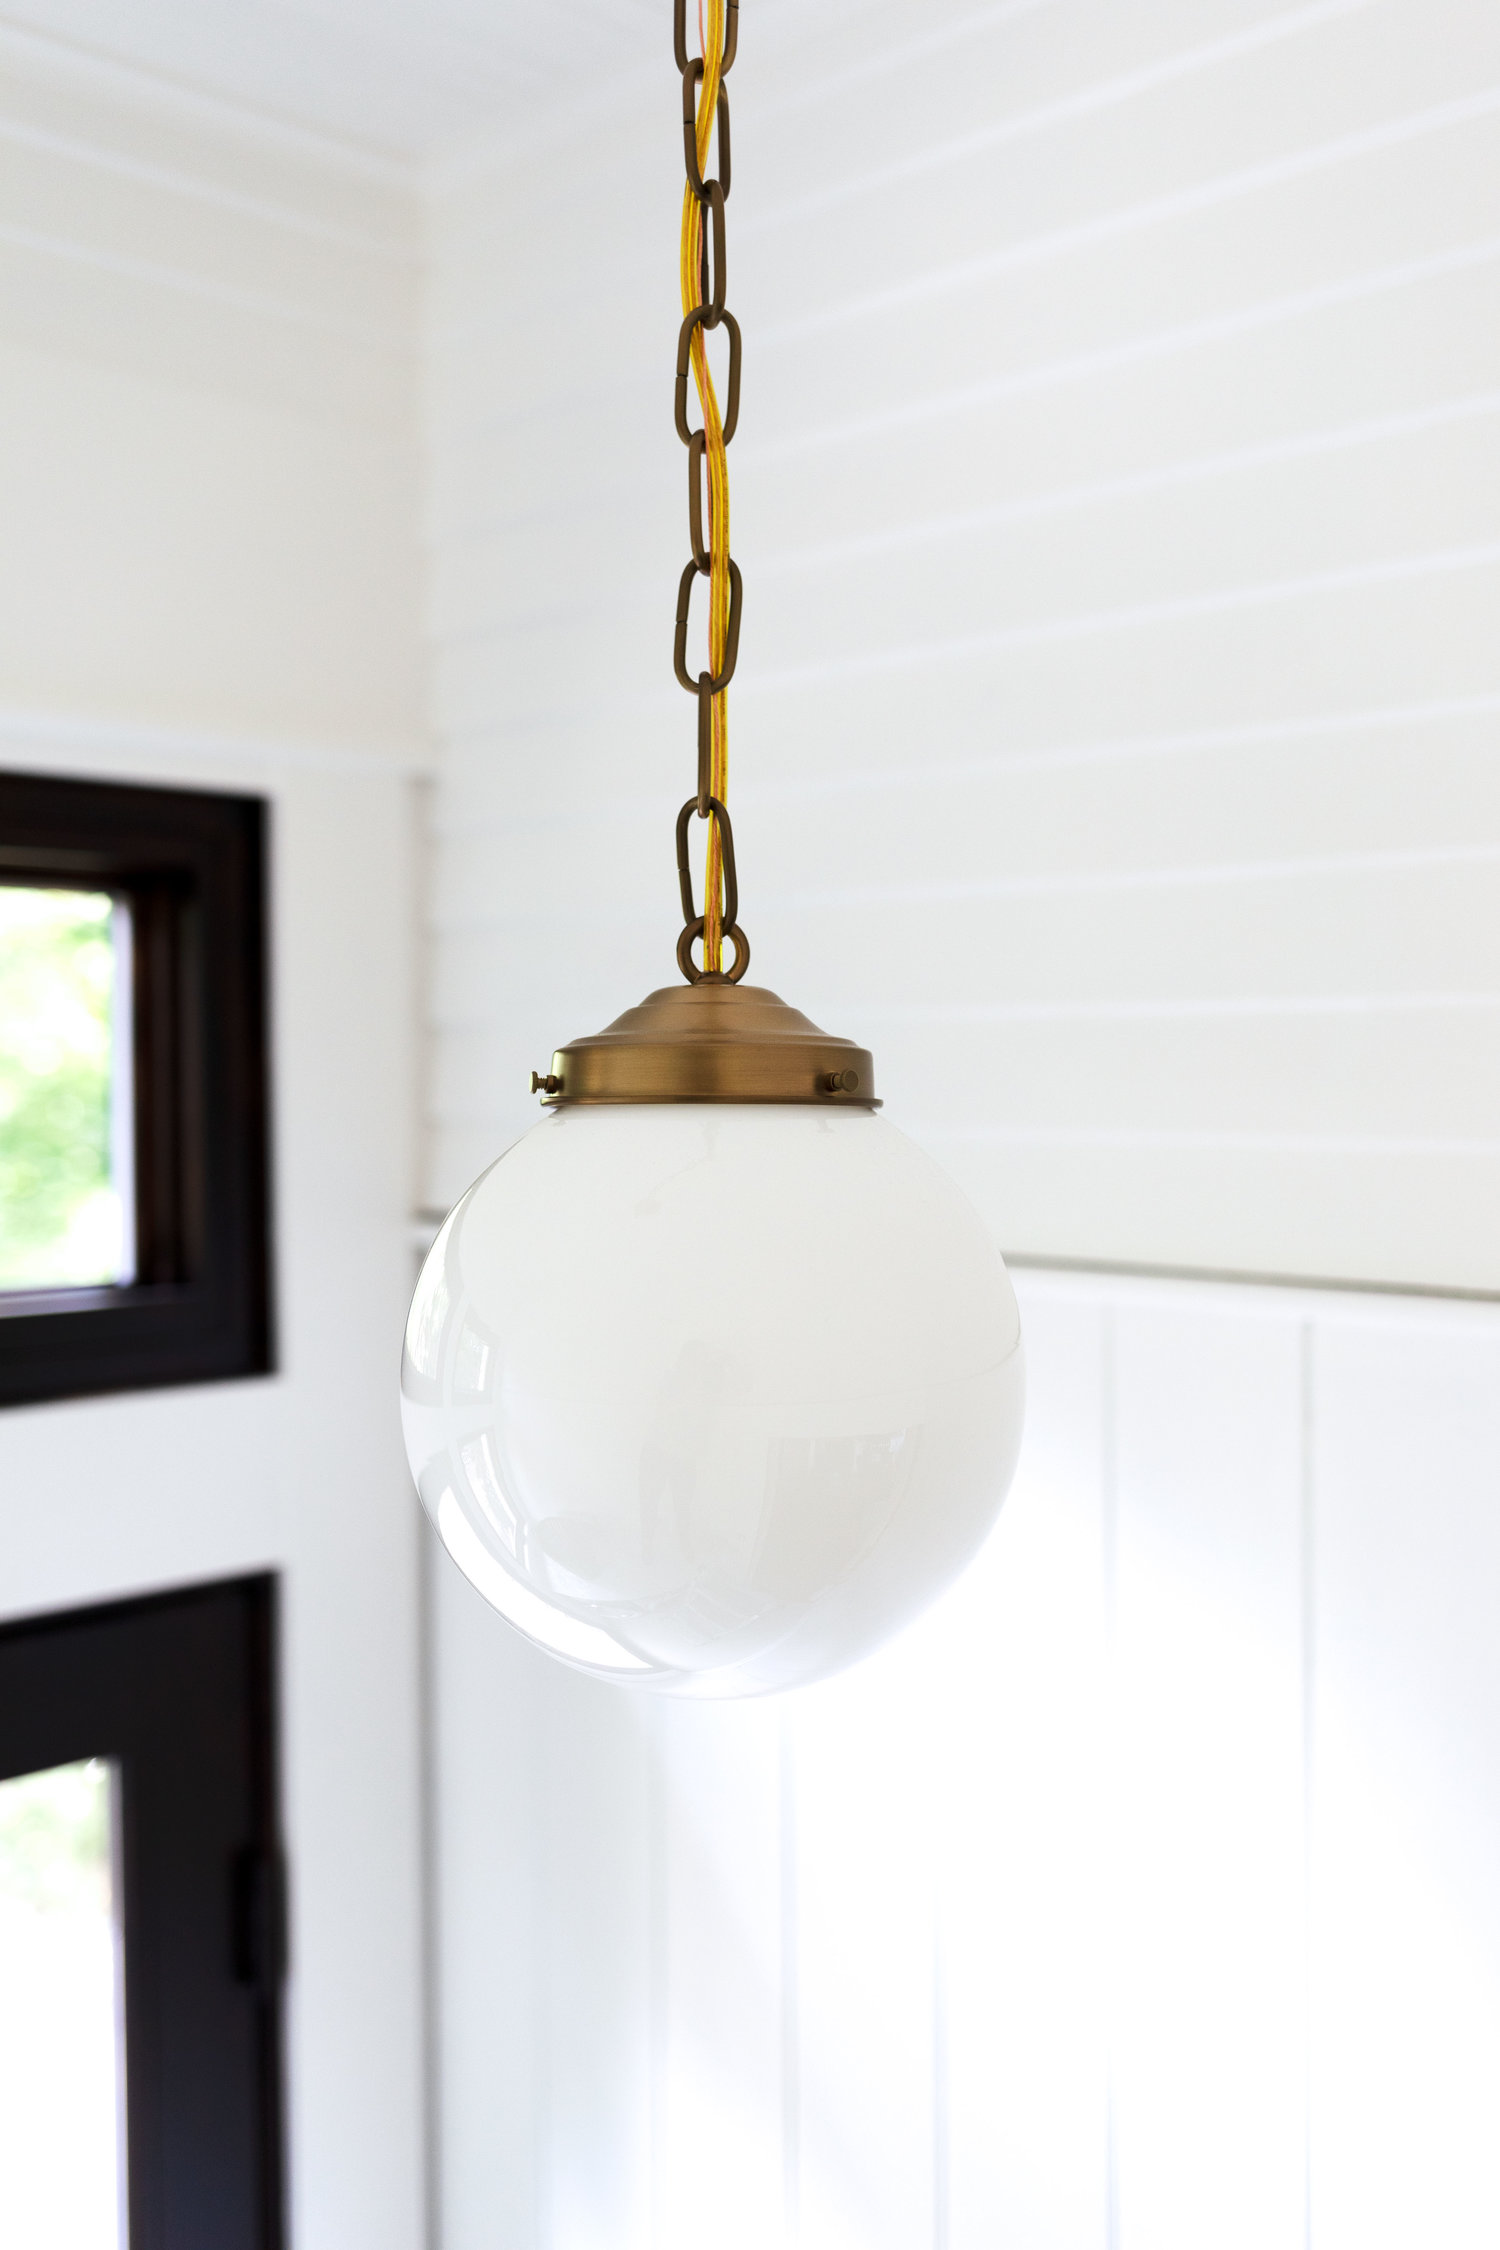 How to Center An Off-Center Ceiling Light (Without Moving the